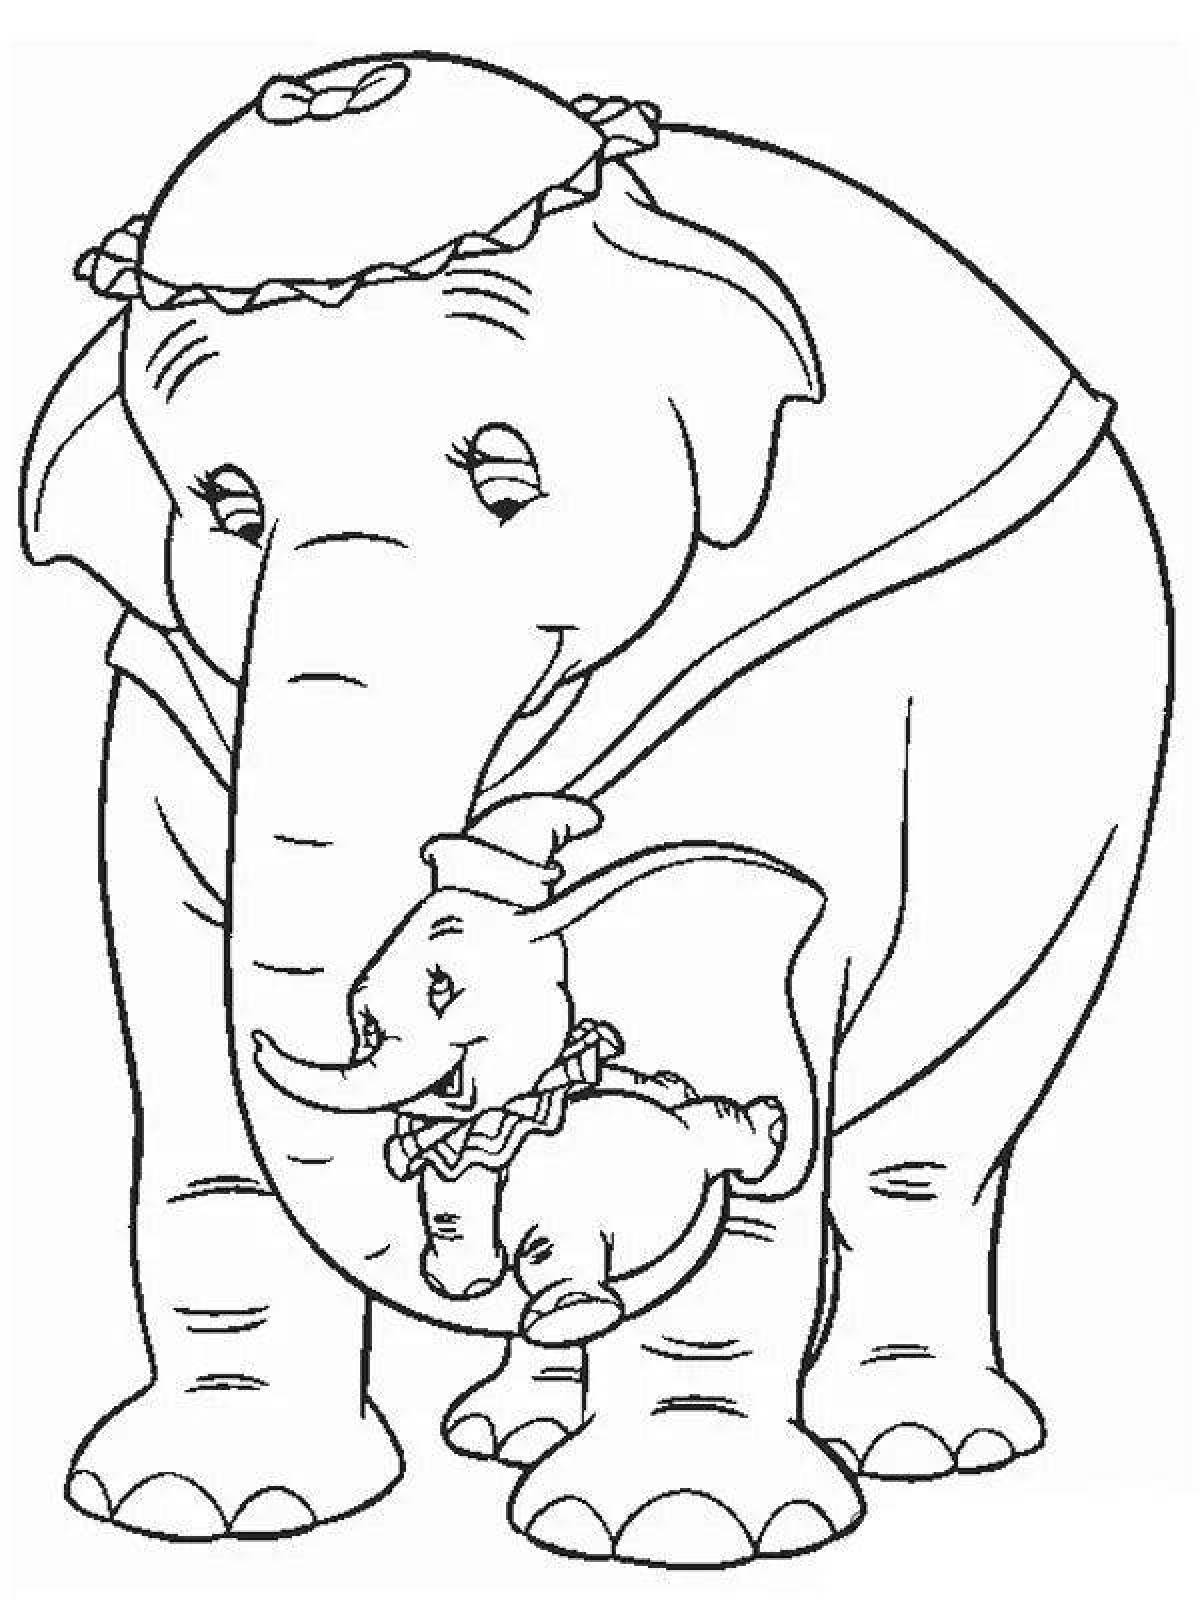 Bright coloring elephant and girl